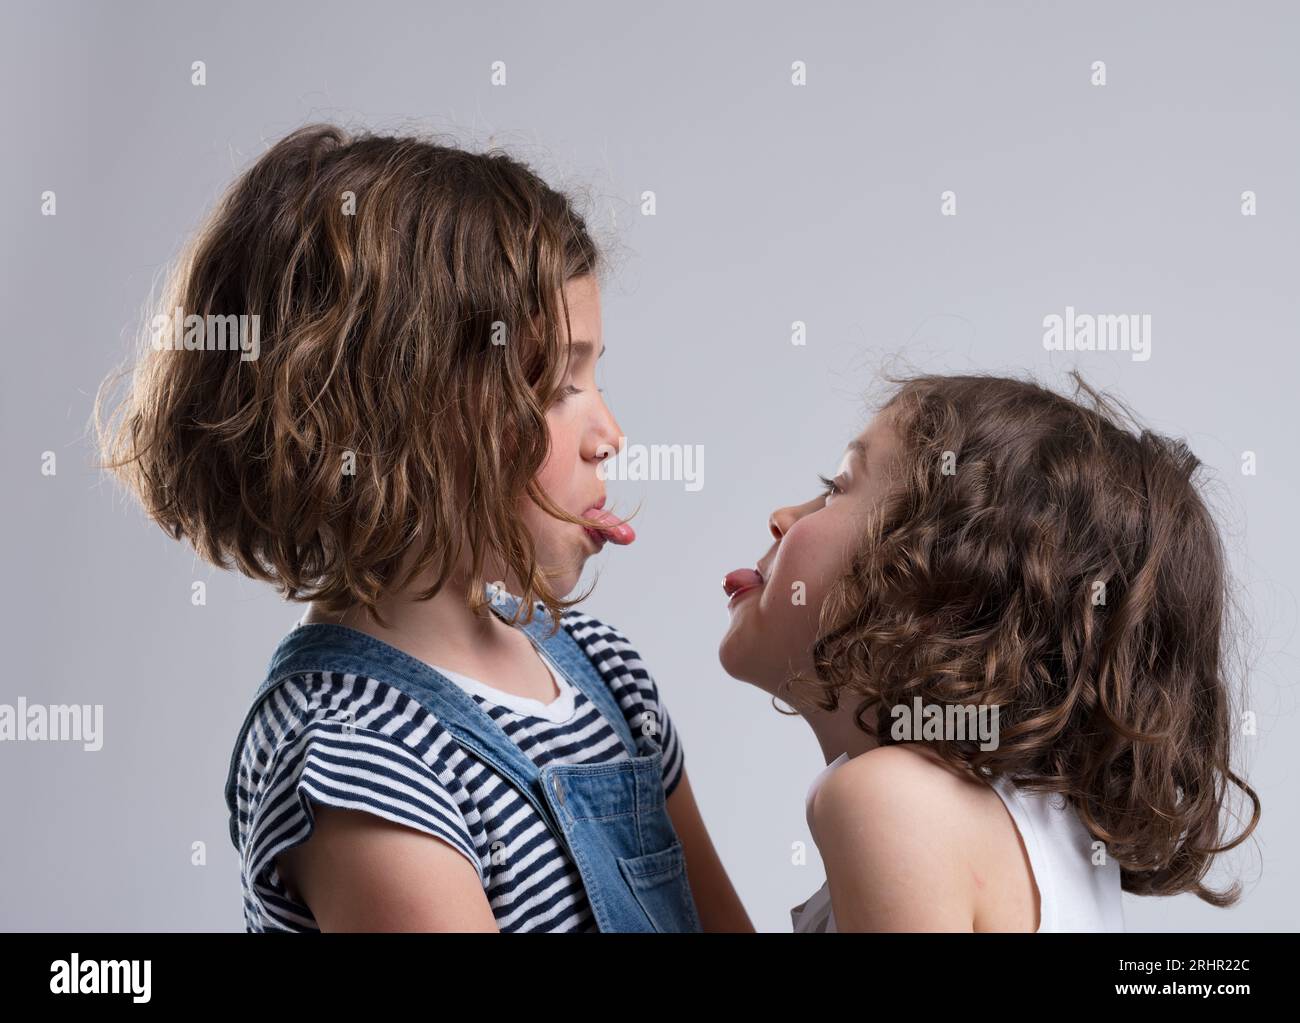 Two young girls, aged 5-7, teasingly stick out their tongues. Likely friends or sisters, they face each other making faces, dressed casually. They lau Stock Photo